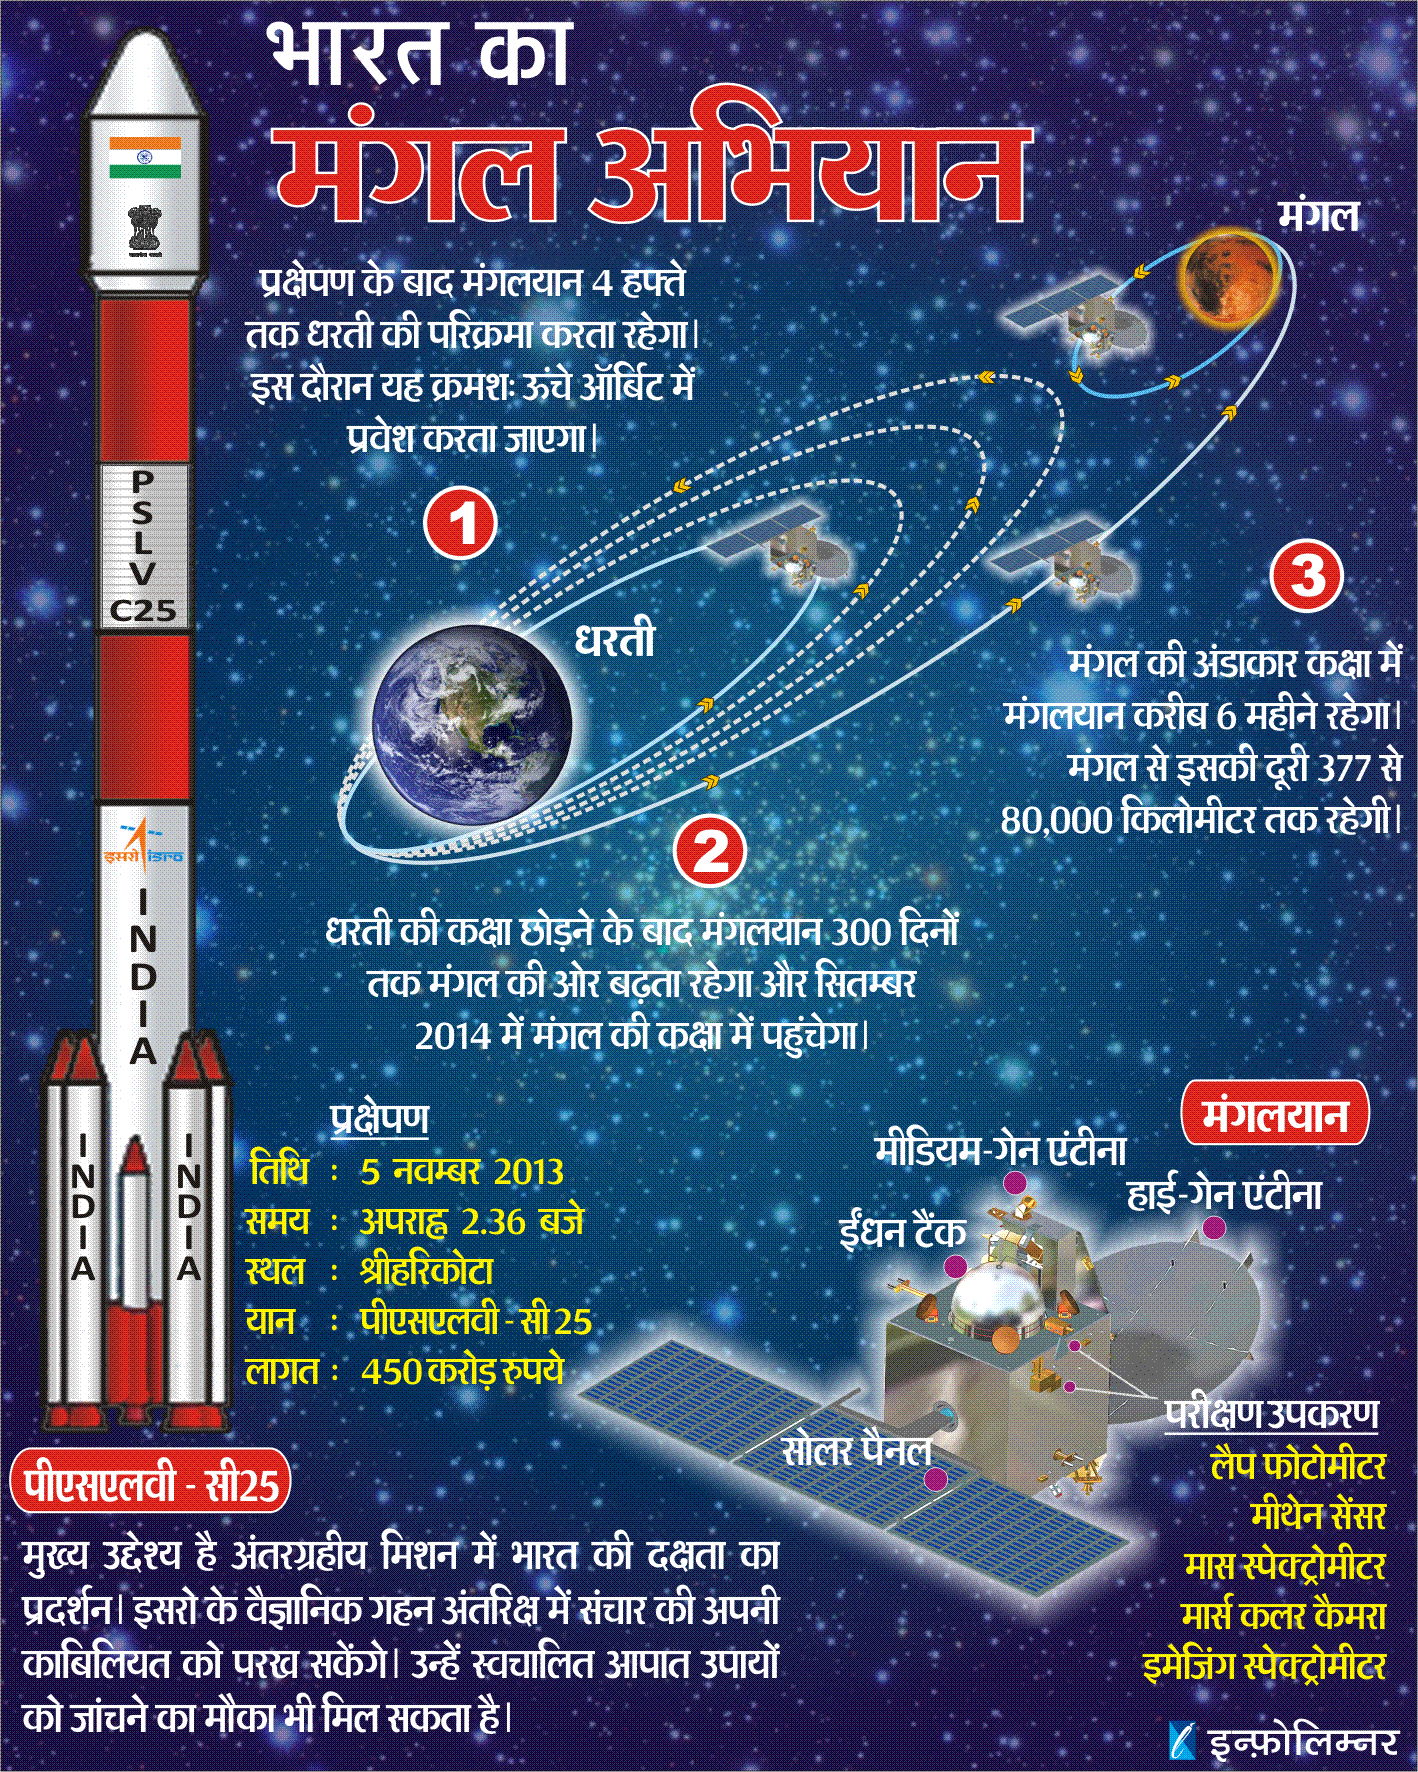 India's Mars Mission - Mangalyaan Infographic